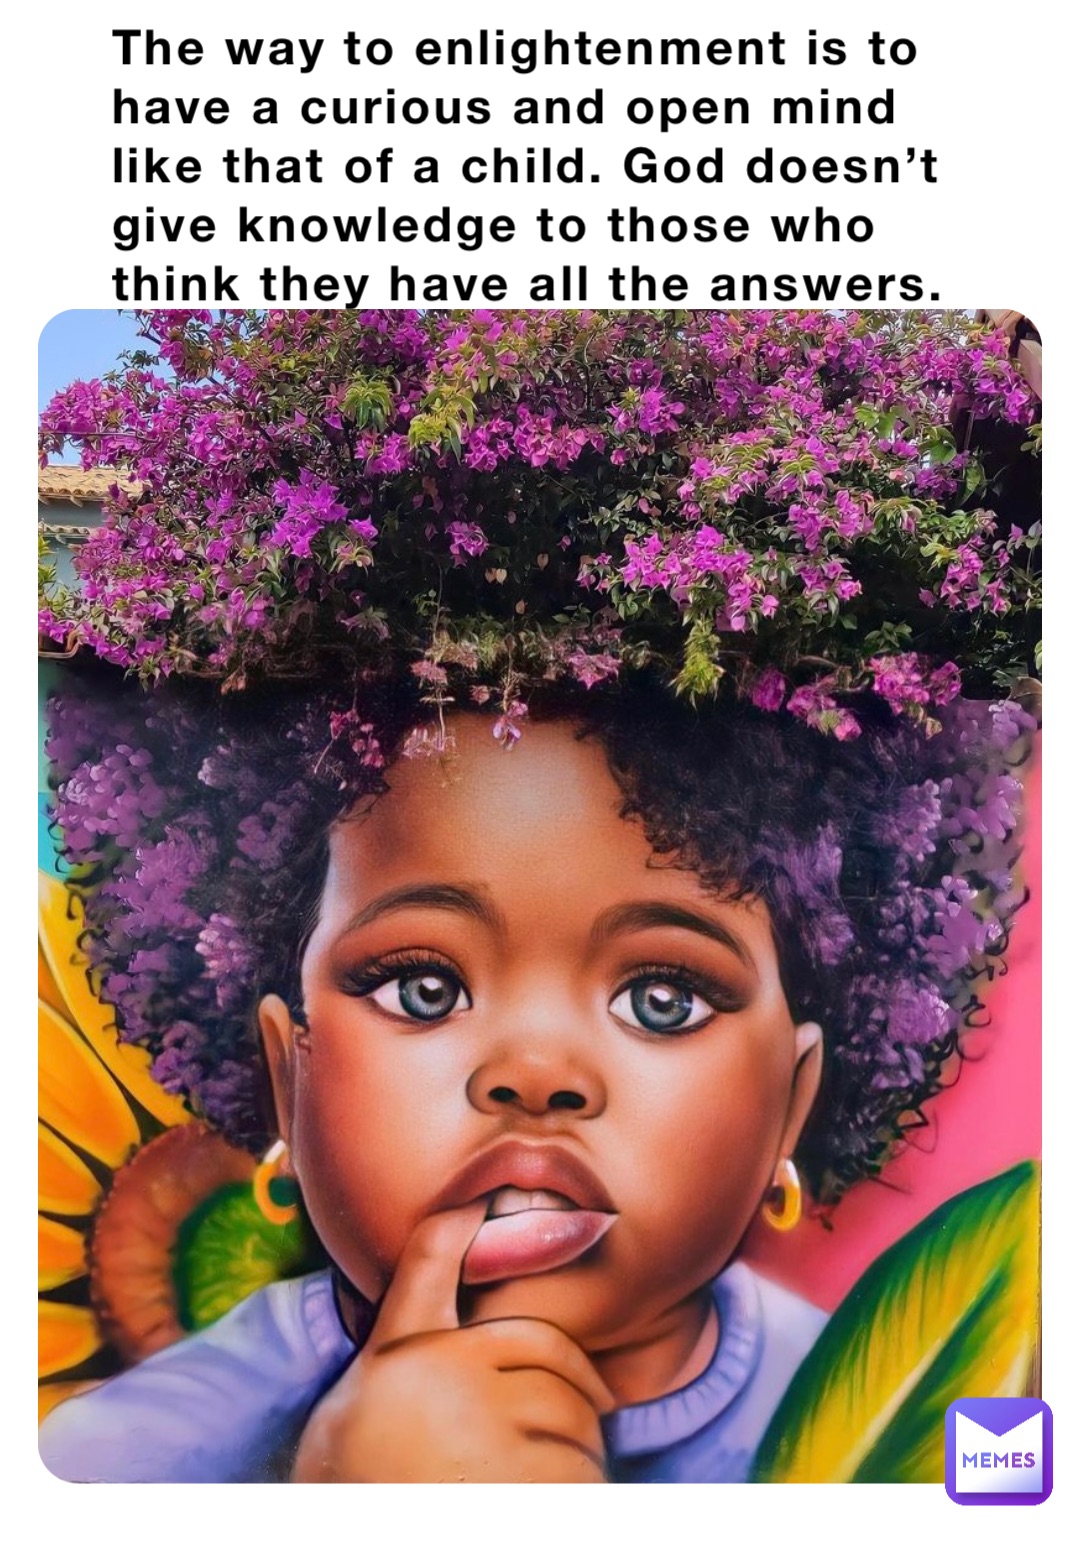 The way to enlightenment is to have a curious and open mind like that of a child. God doesn’t give knowledge to those who think they have all the answers.